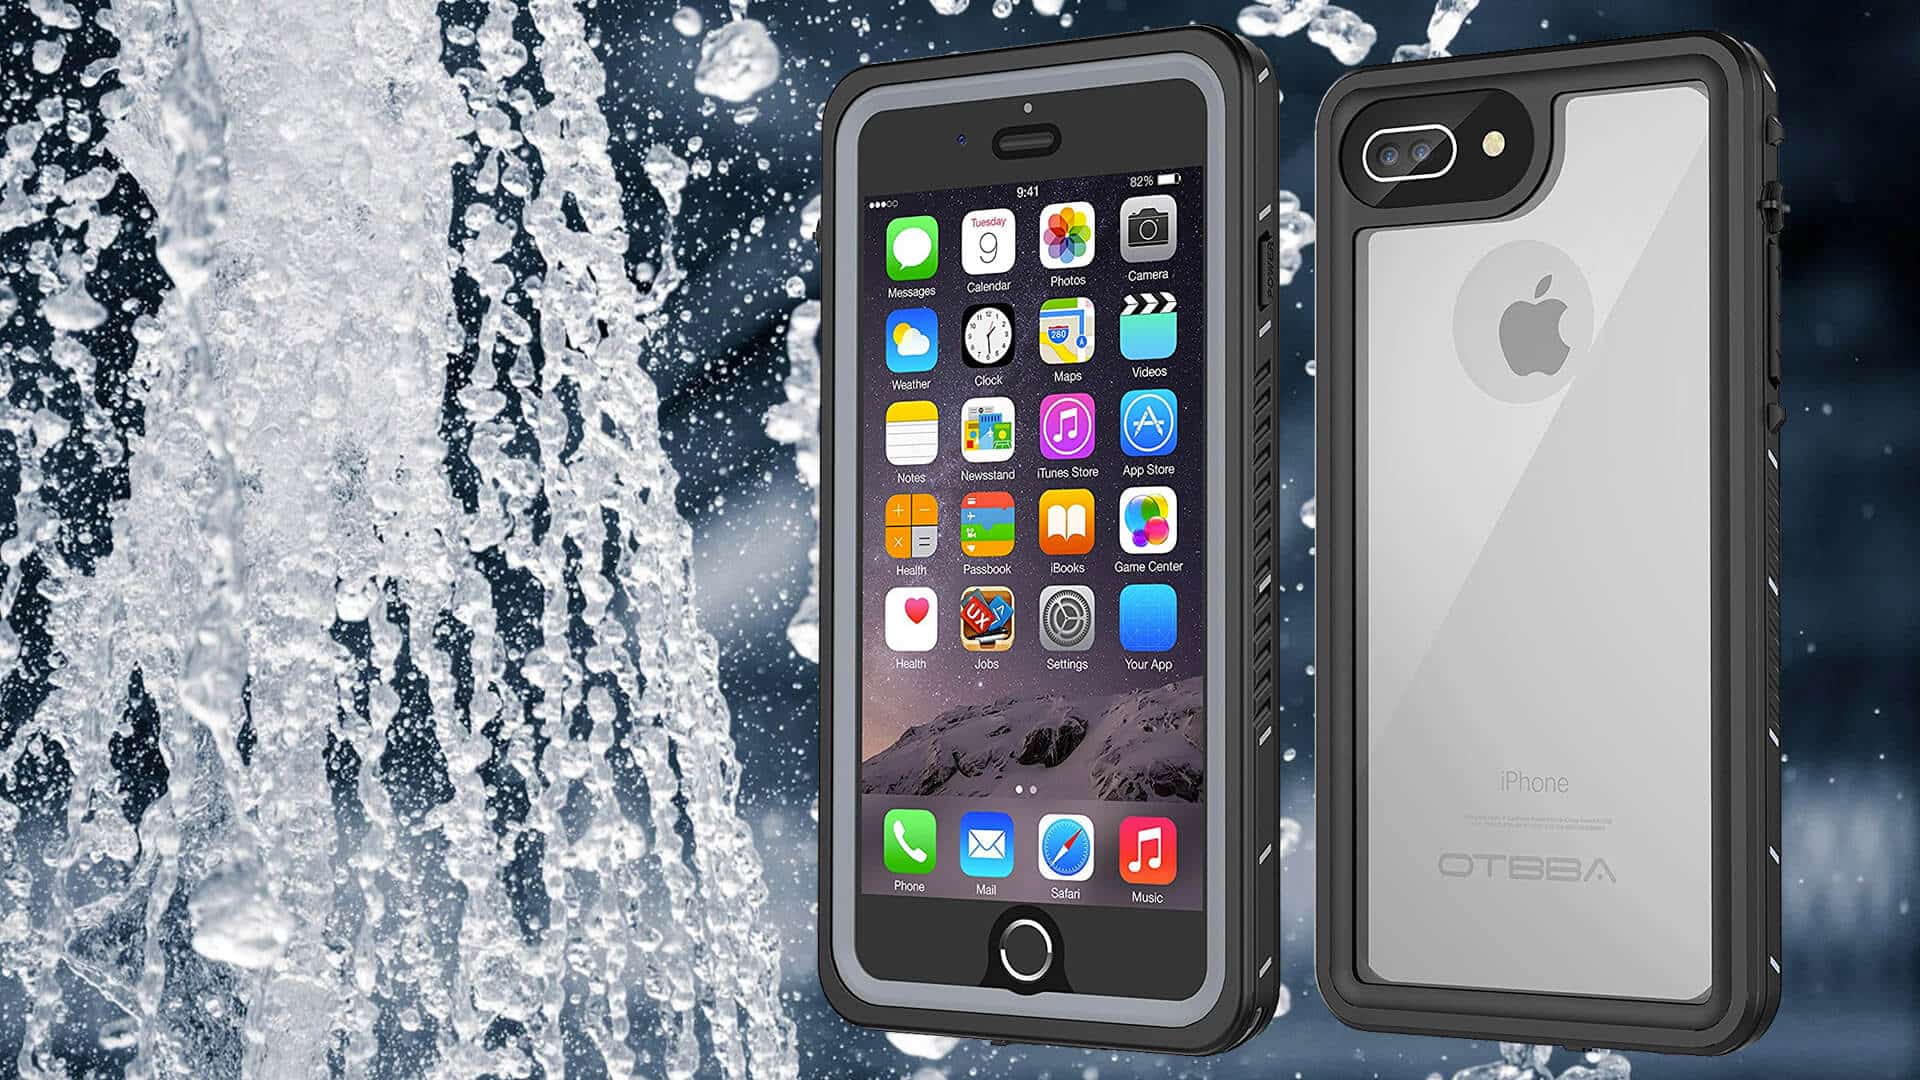 Step-by-Step Guide: Opening The Waterproof Shockproof Case For IPhone 7 Plus